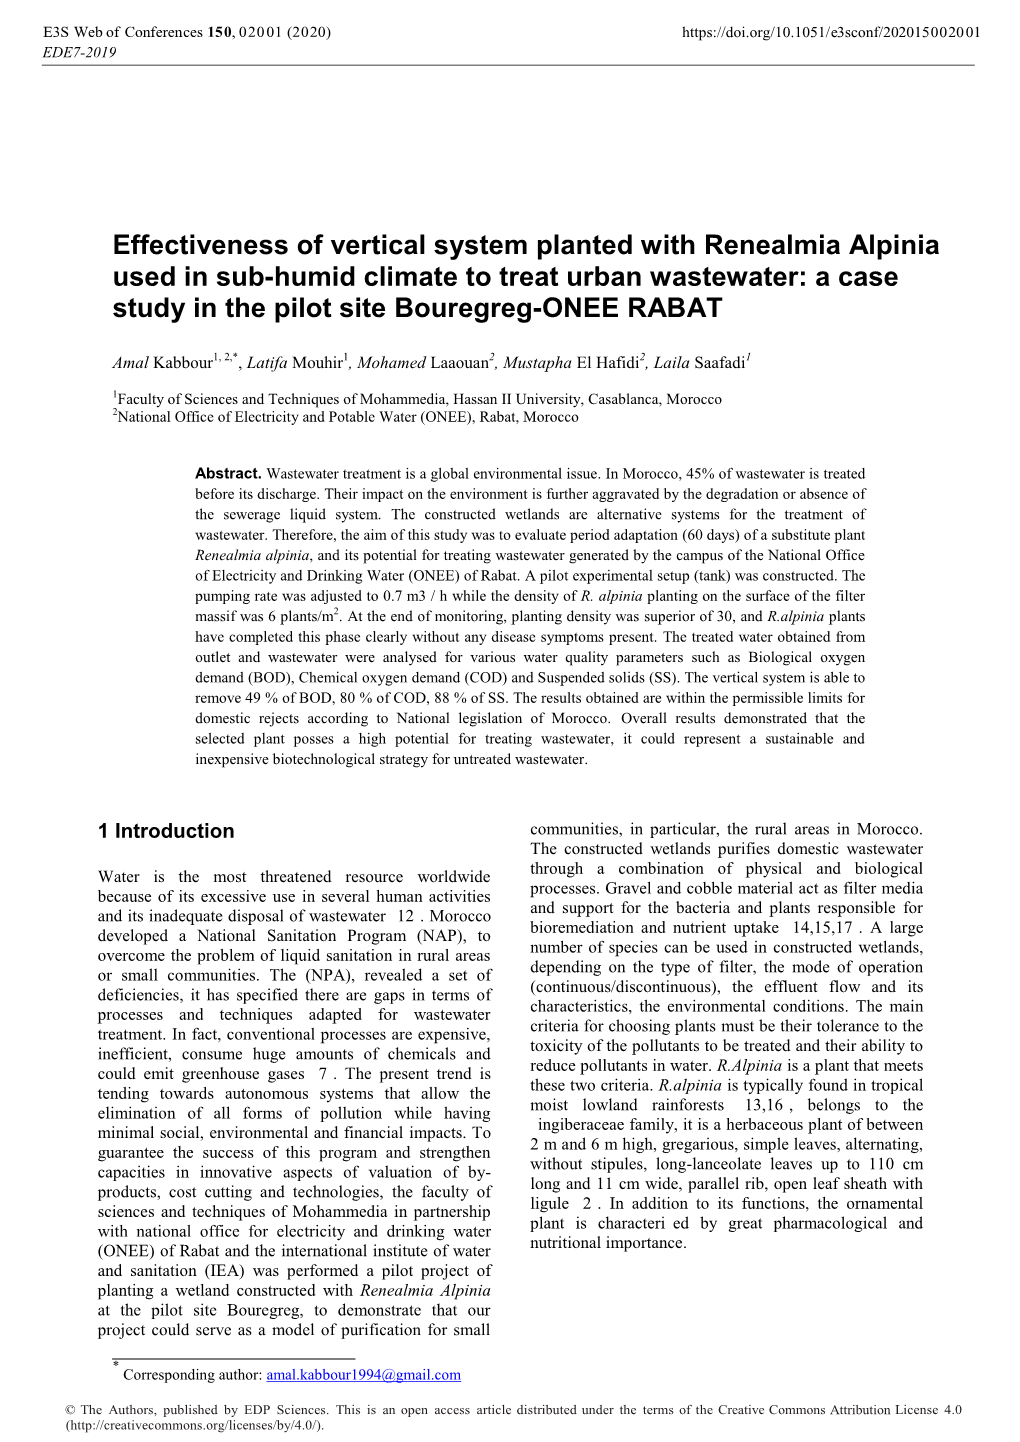 Effectiveness of Vertical System Planted with Renealmia Alpinia